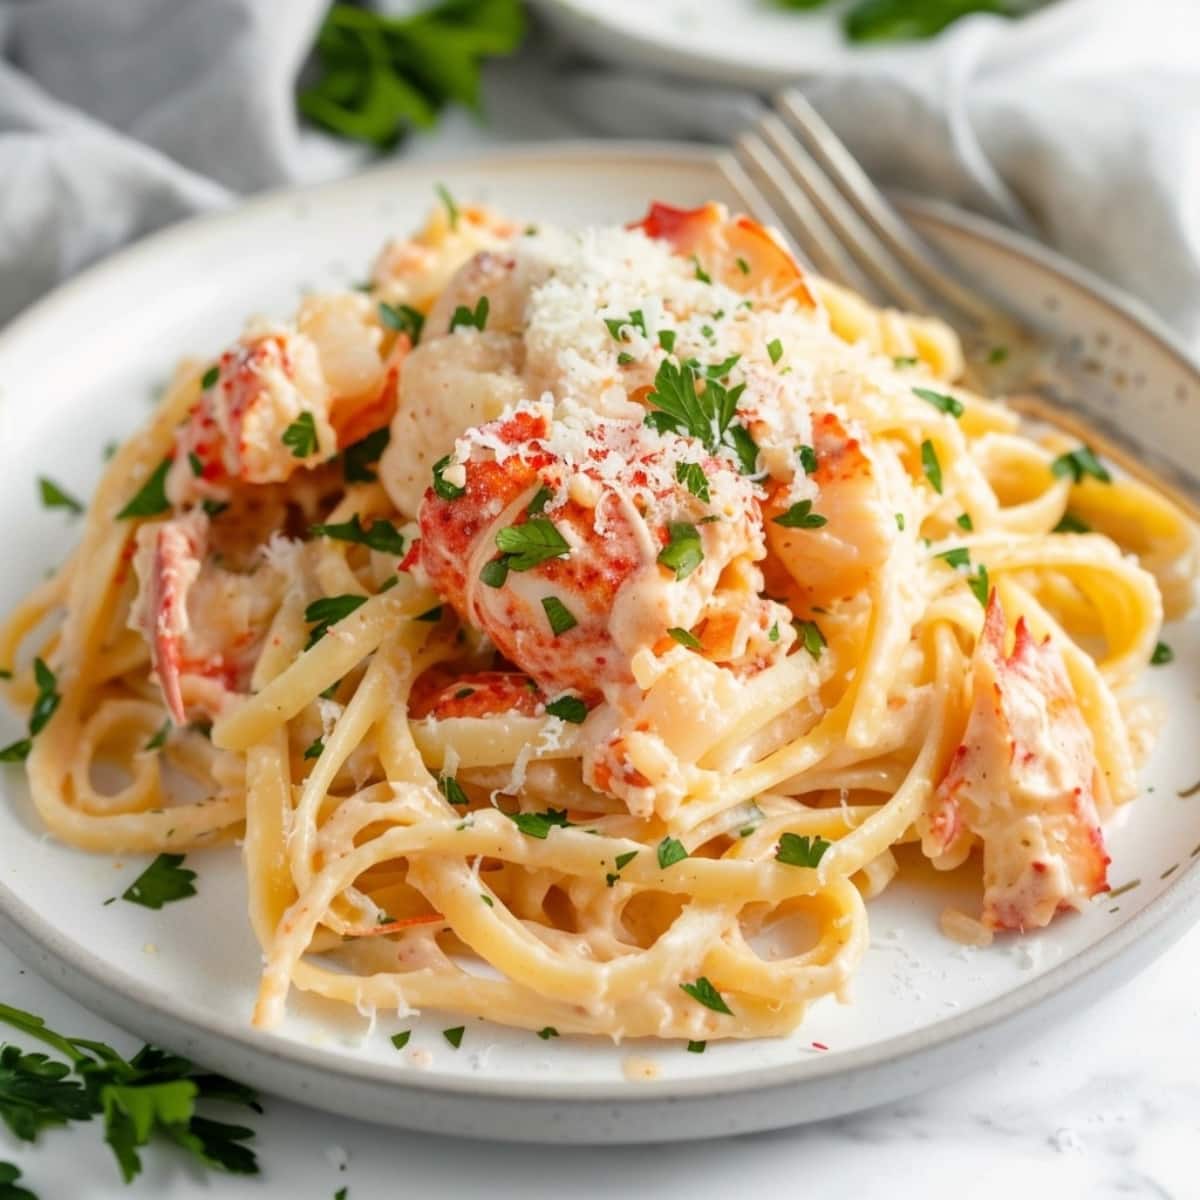 Pasta served with creamy sauce and lobster on a plate.